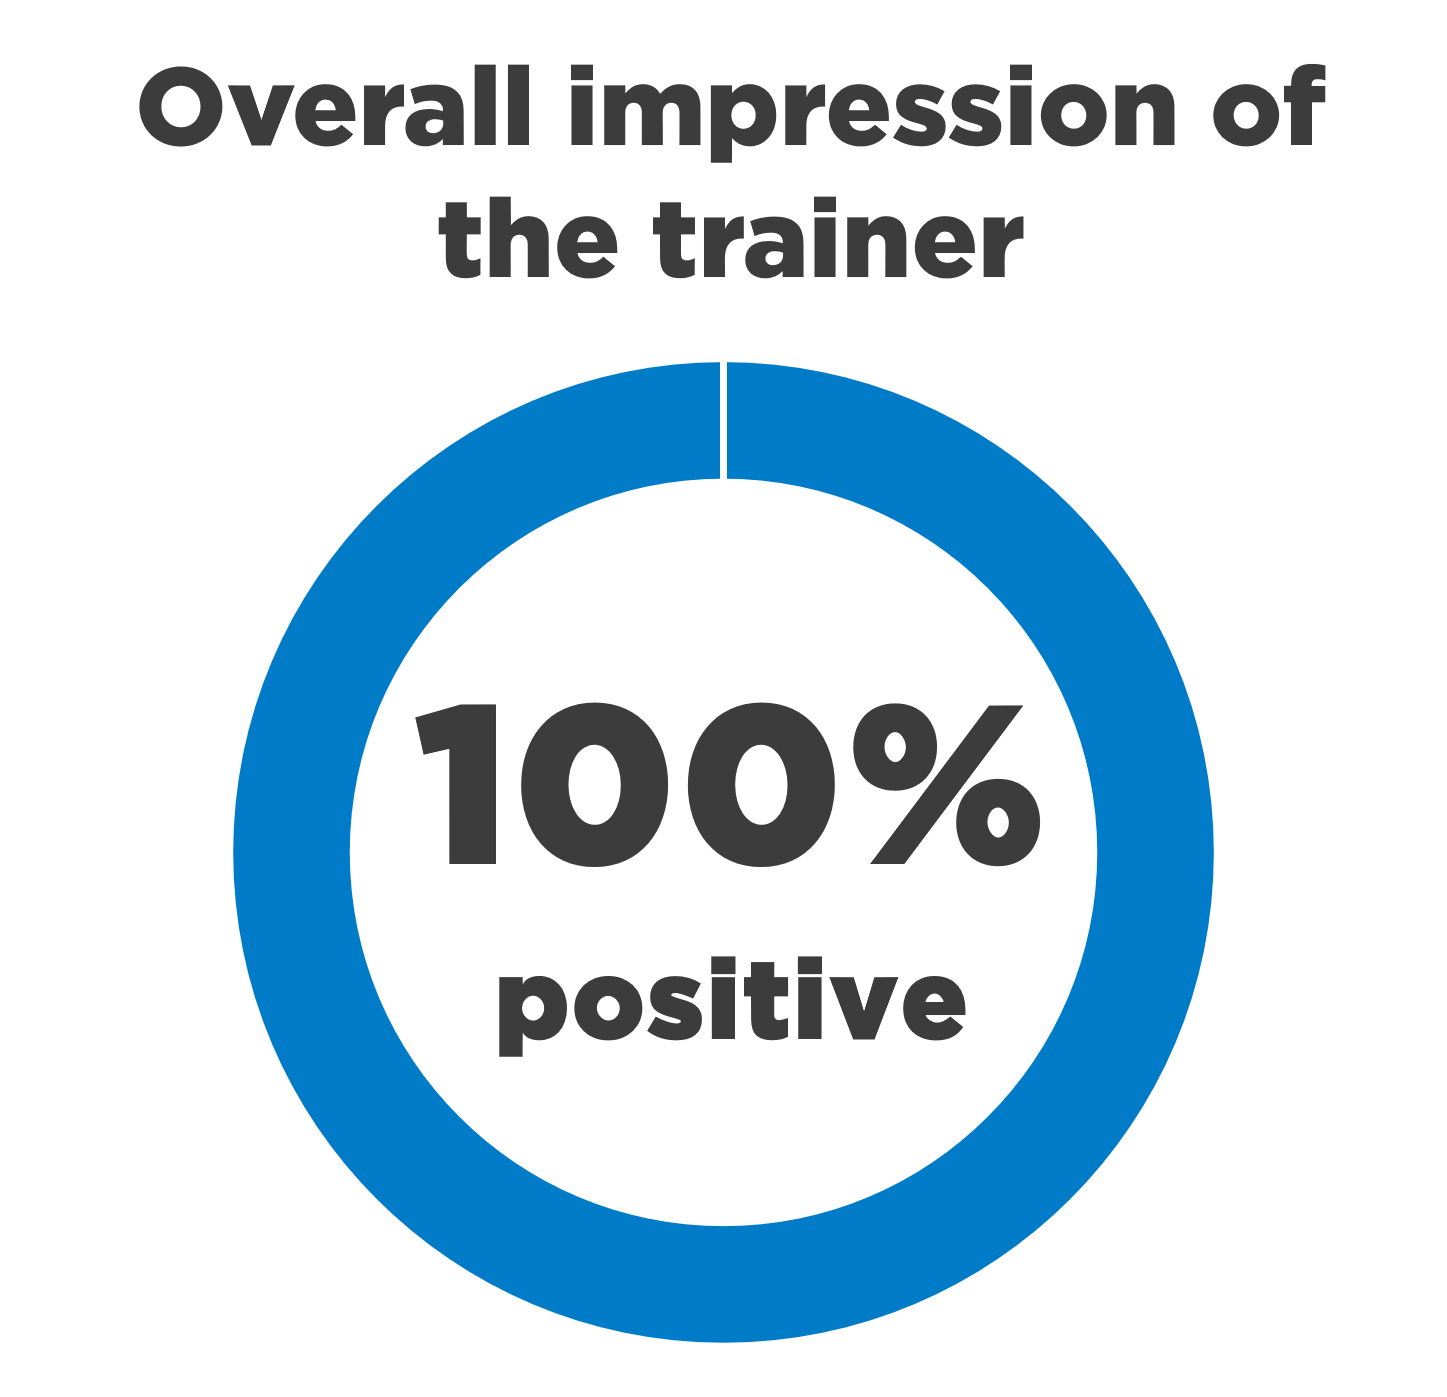 Text reads: "Overall impression of the trainer 100% positive" with a pie chart representing the statement